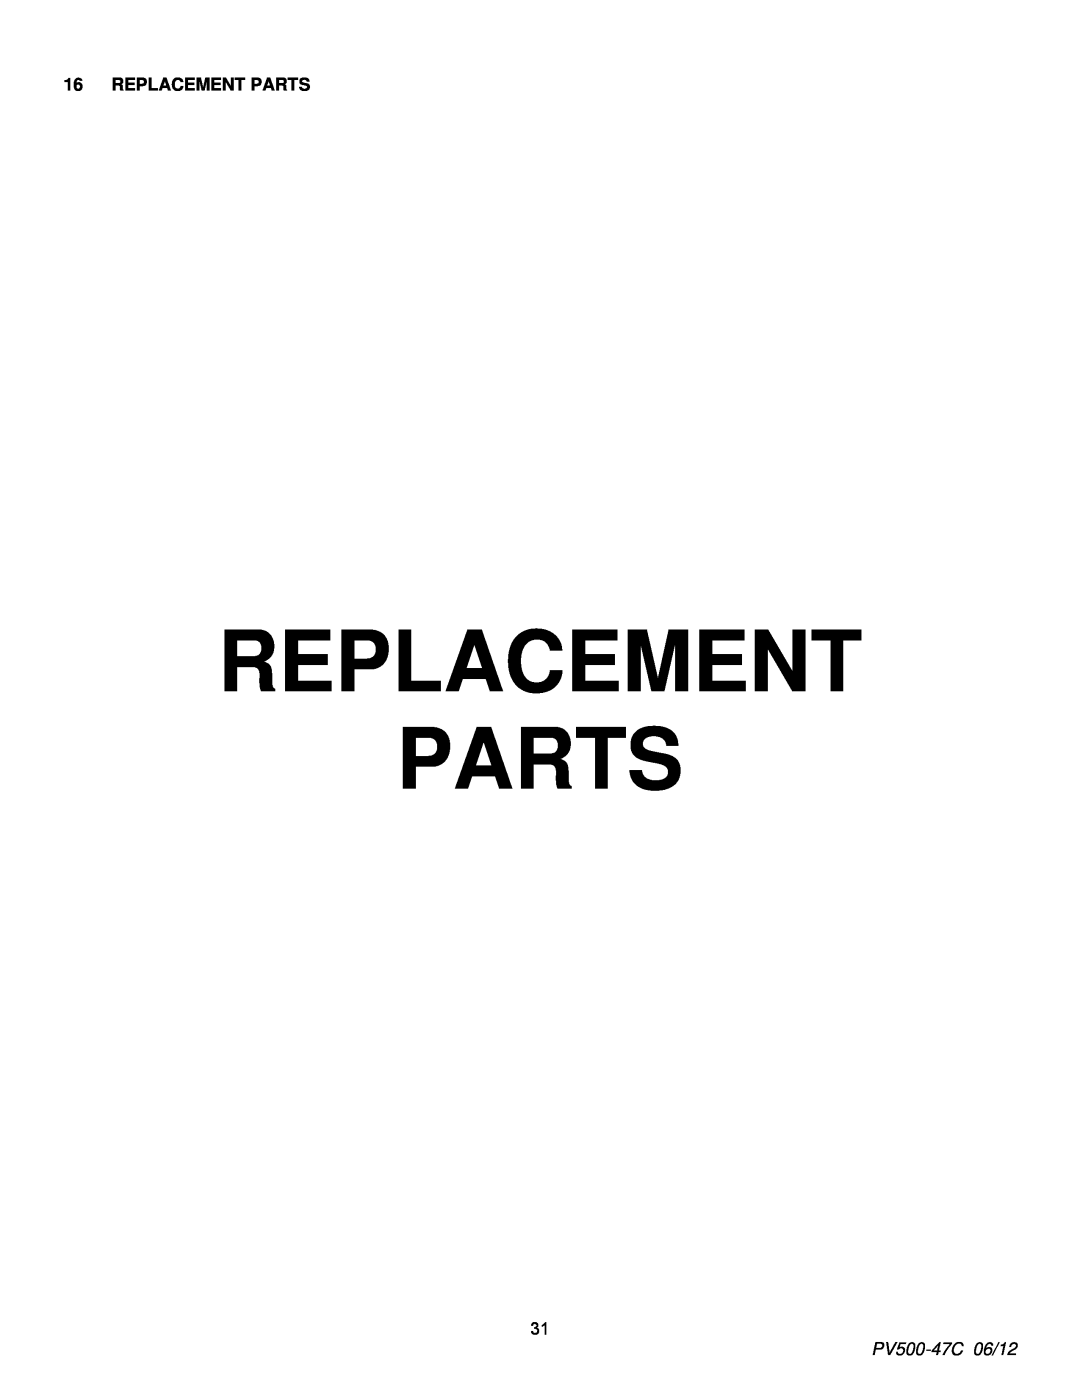 PVI Industries manual Replacement Parts, PV500-47C06/12 